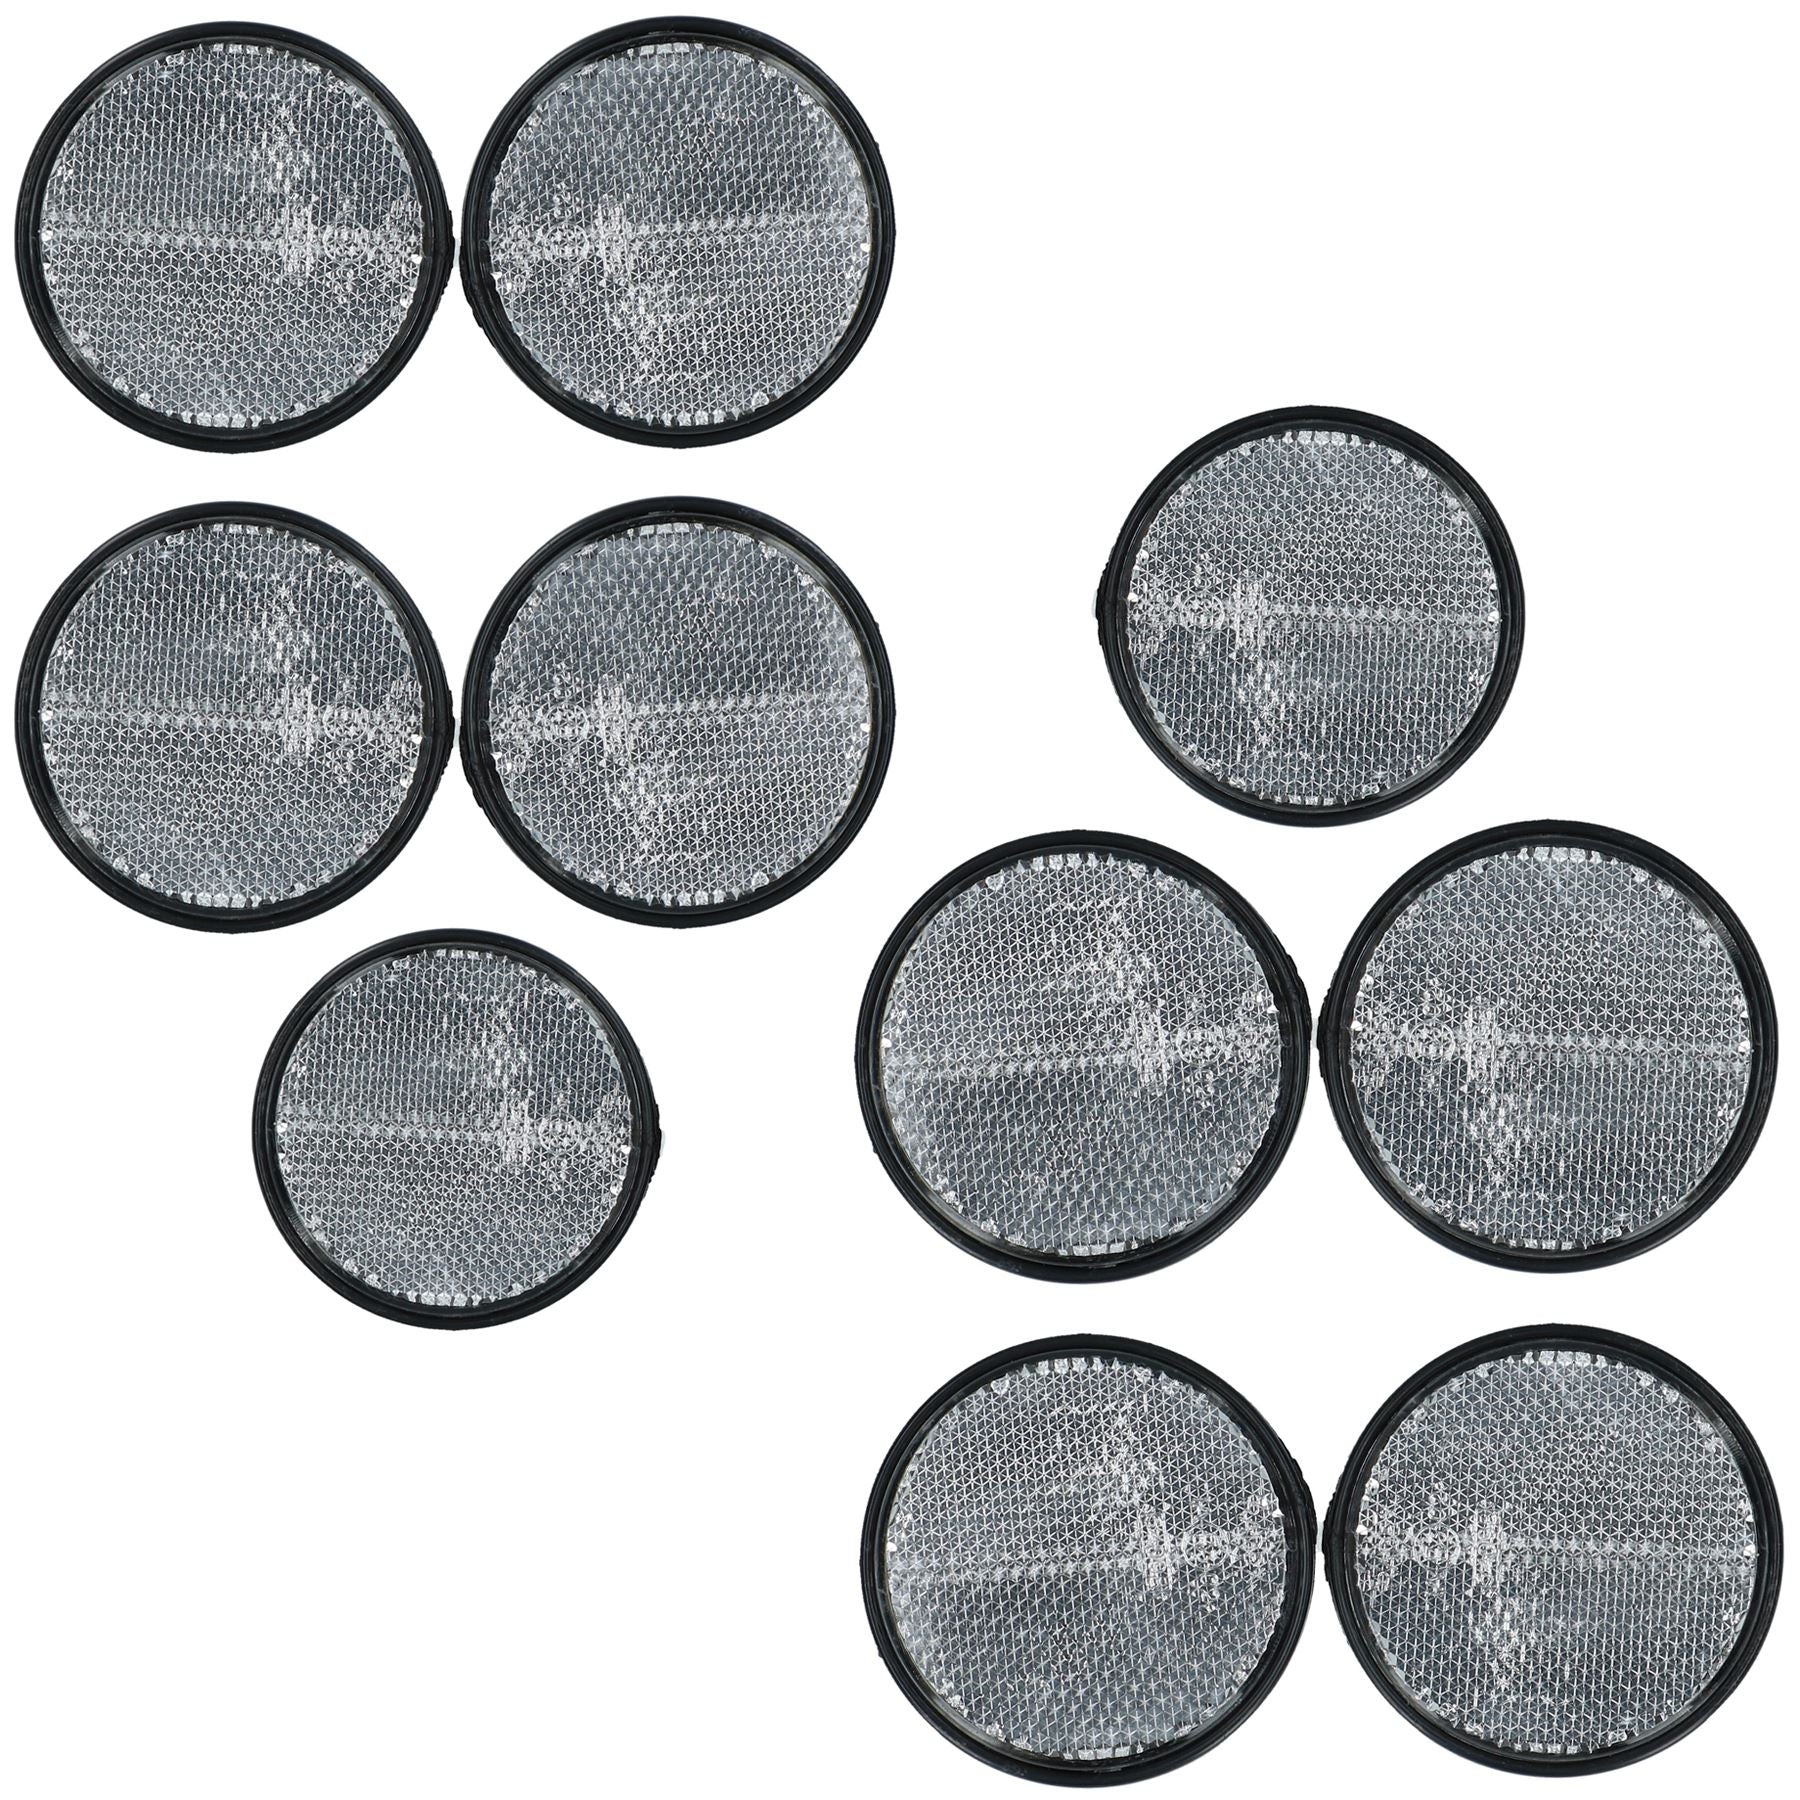 White Clear Retro Reflector Trailer Fence Post with Self-Adhesive Back 10 PACK